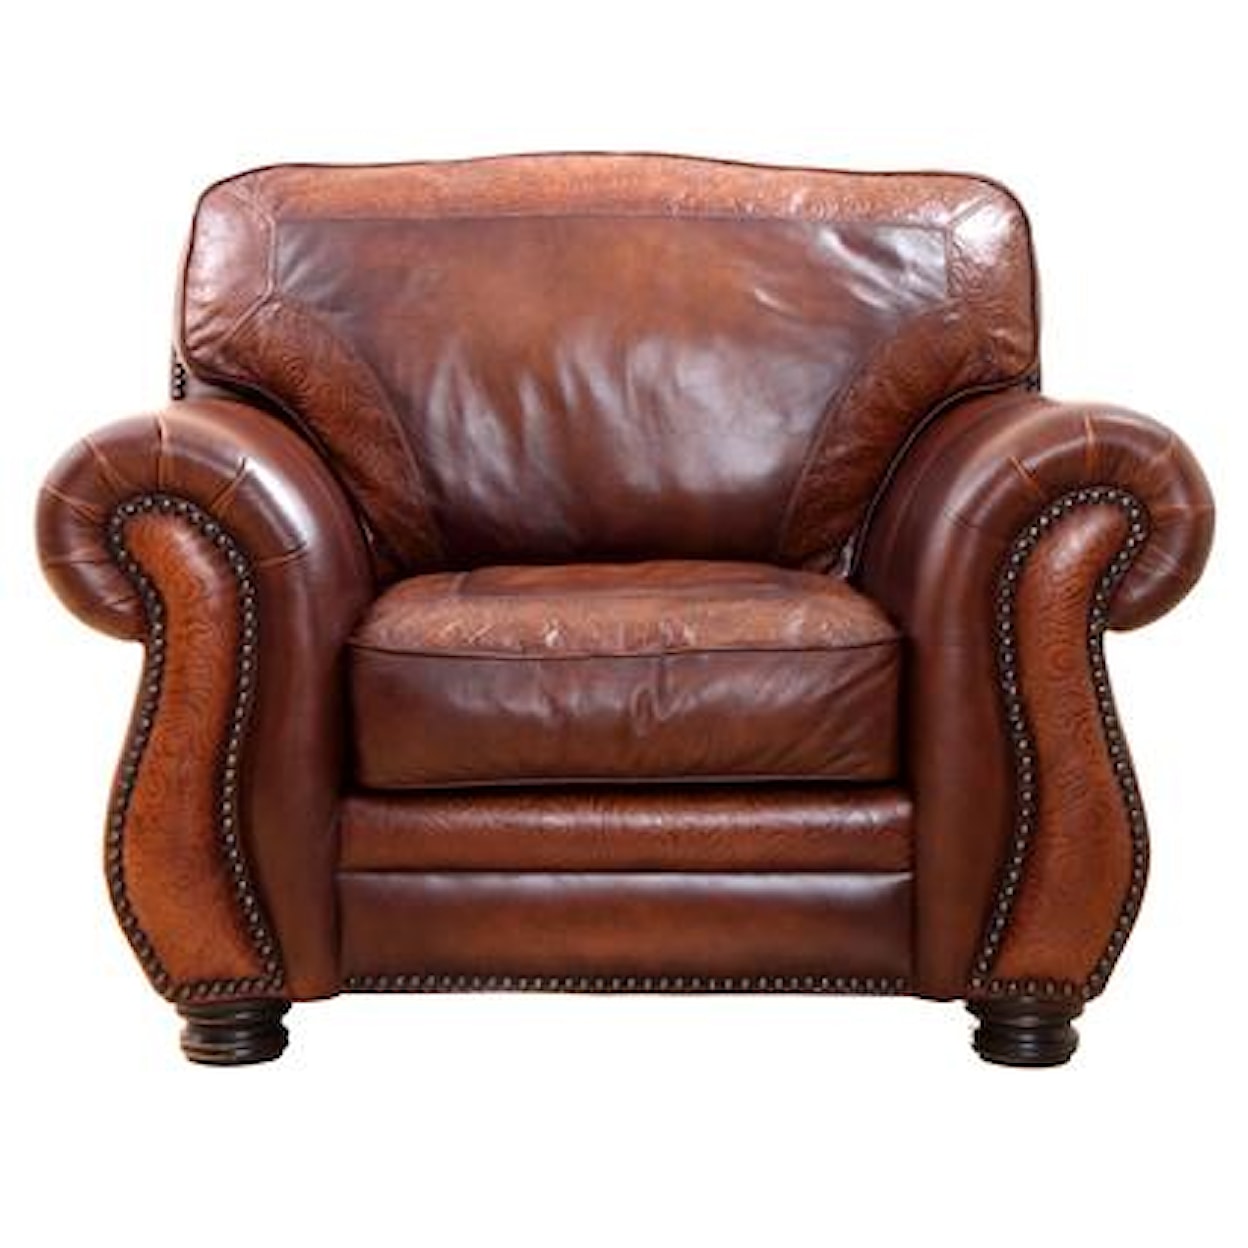 Artistic Leathers Signature Collection Leather Chair